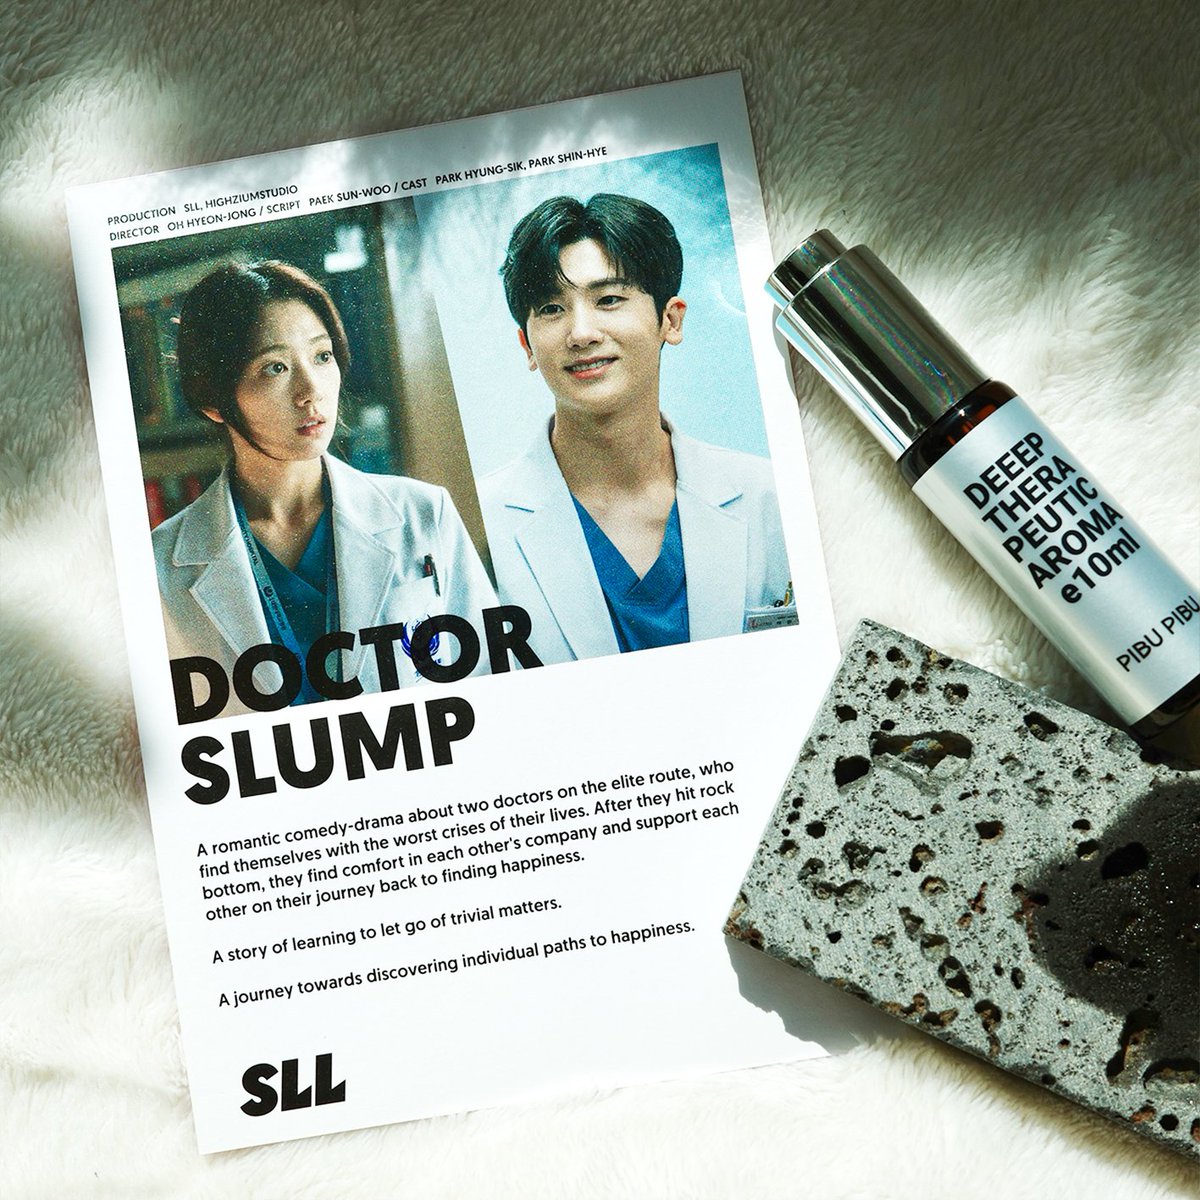 This is our PROMOTIONAL GIFT for FILMART 2024 in Hong Kong next week!

#DoctorSlump #WooNeulCouple  
#ParkHyungSik #ParkShinHye
#SLL #PromotionalGift #FILMART2024
#ドクタースランプ #パクシネ #パクヒョンシク